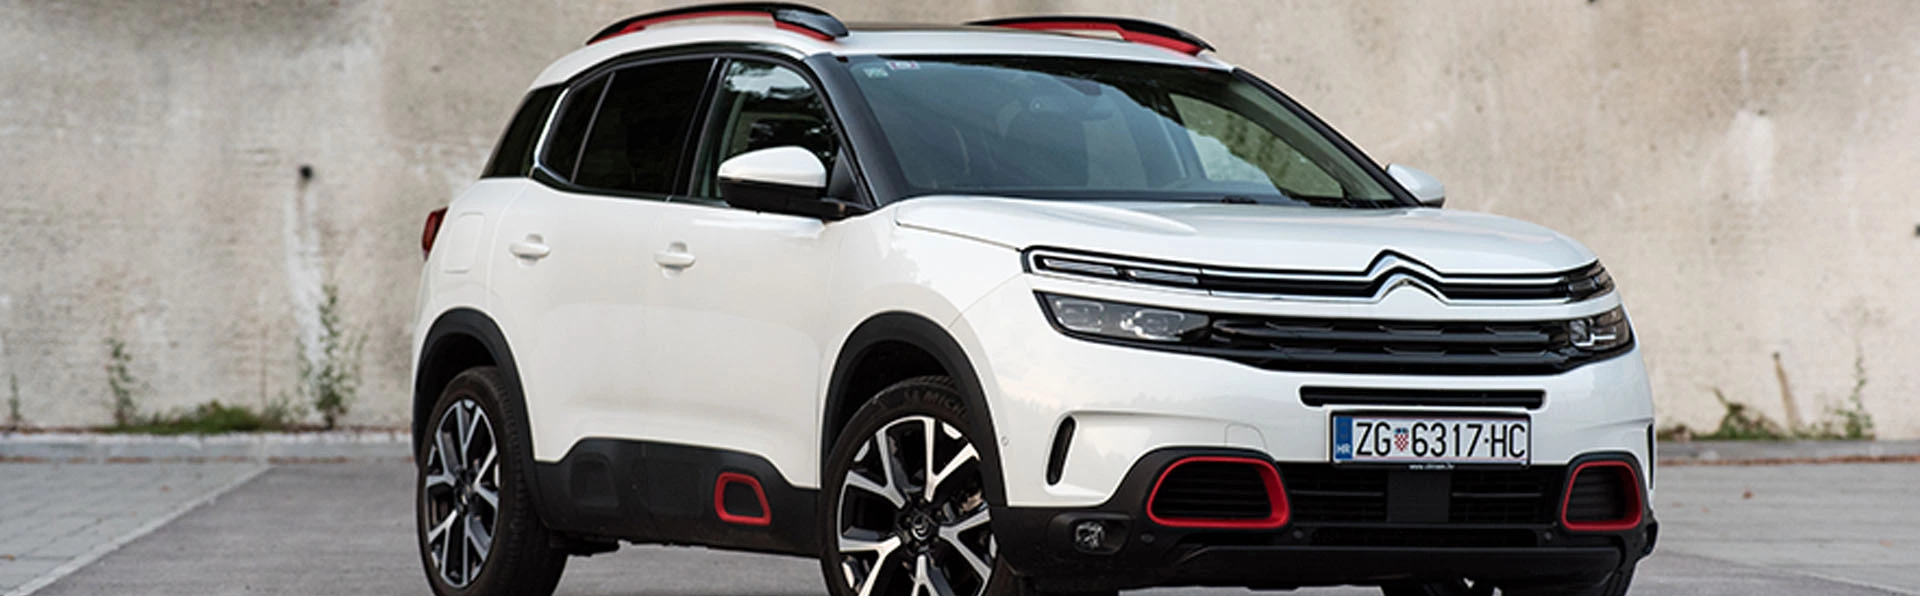 Our Citroen C5 Aircross Review